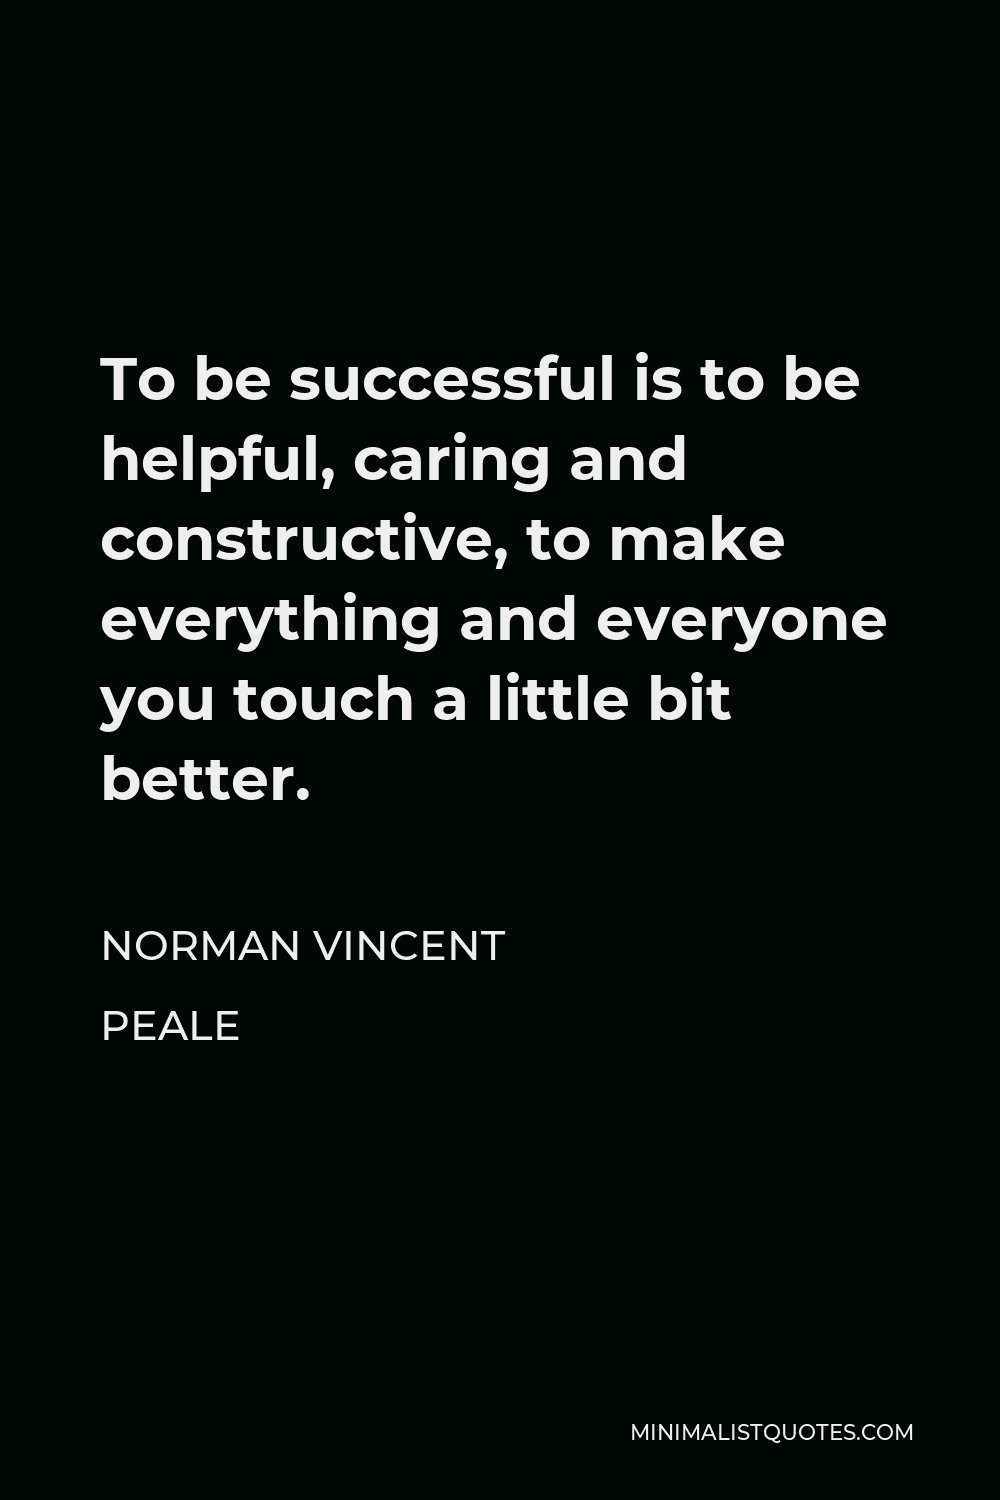 Norman Vincent Peale Quote - To be successful is to be helpful, caring and constructive, to make everything and everyone you touch a little bit better.